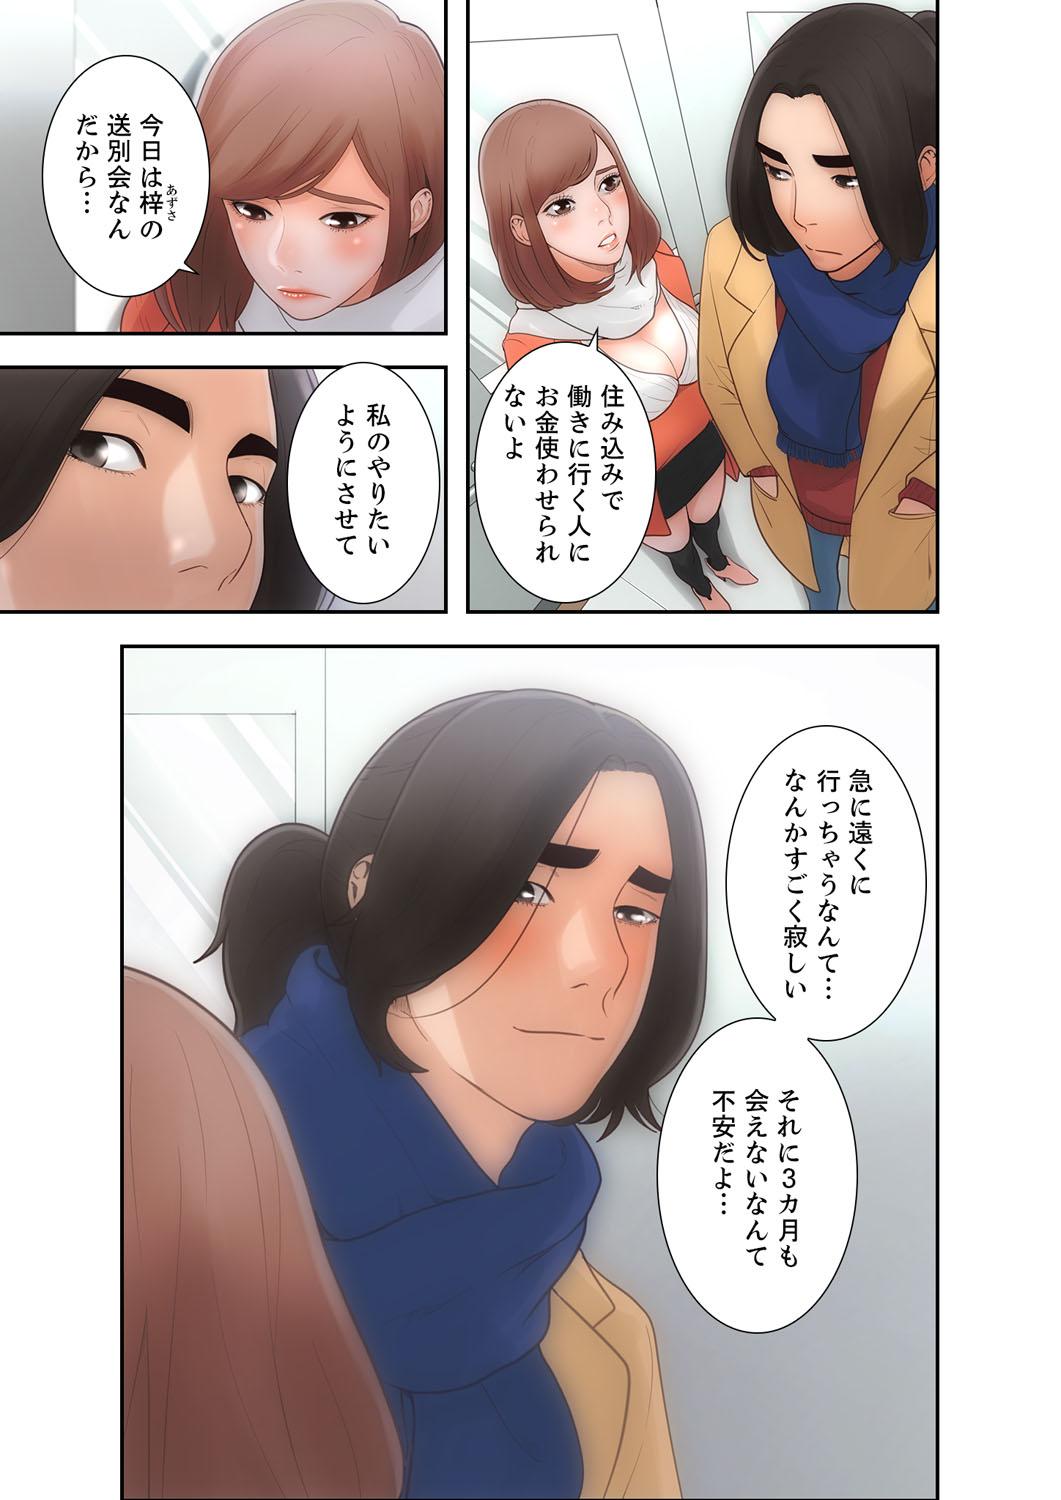 Young 解禁 1-5 Cruising - Page 7